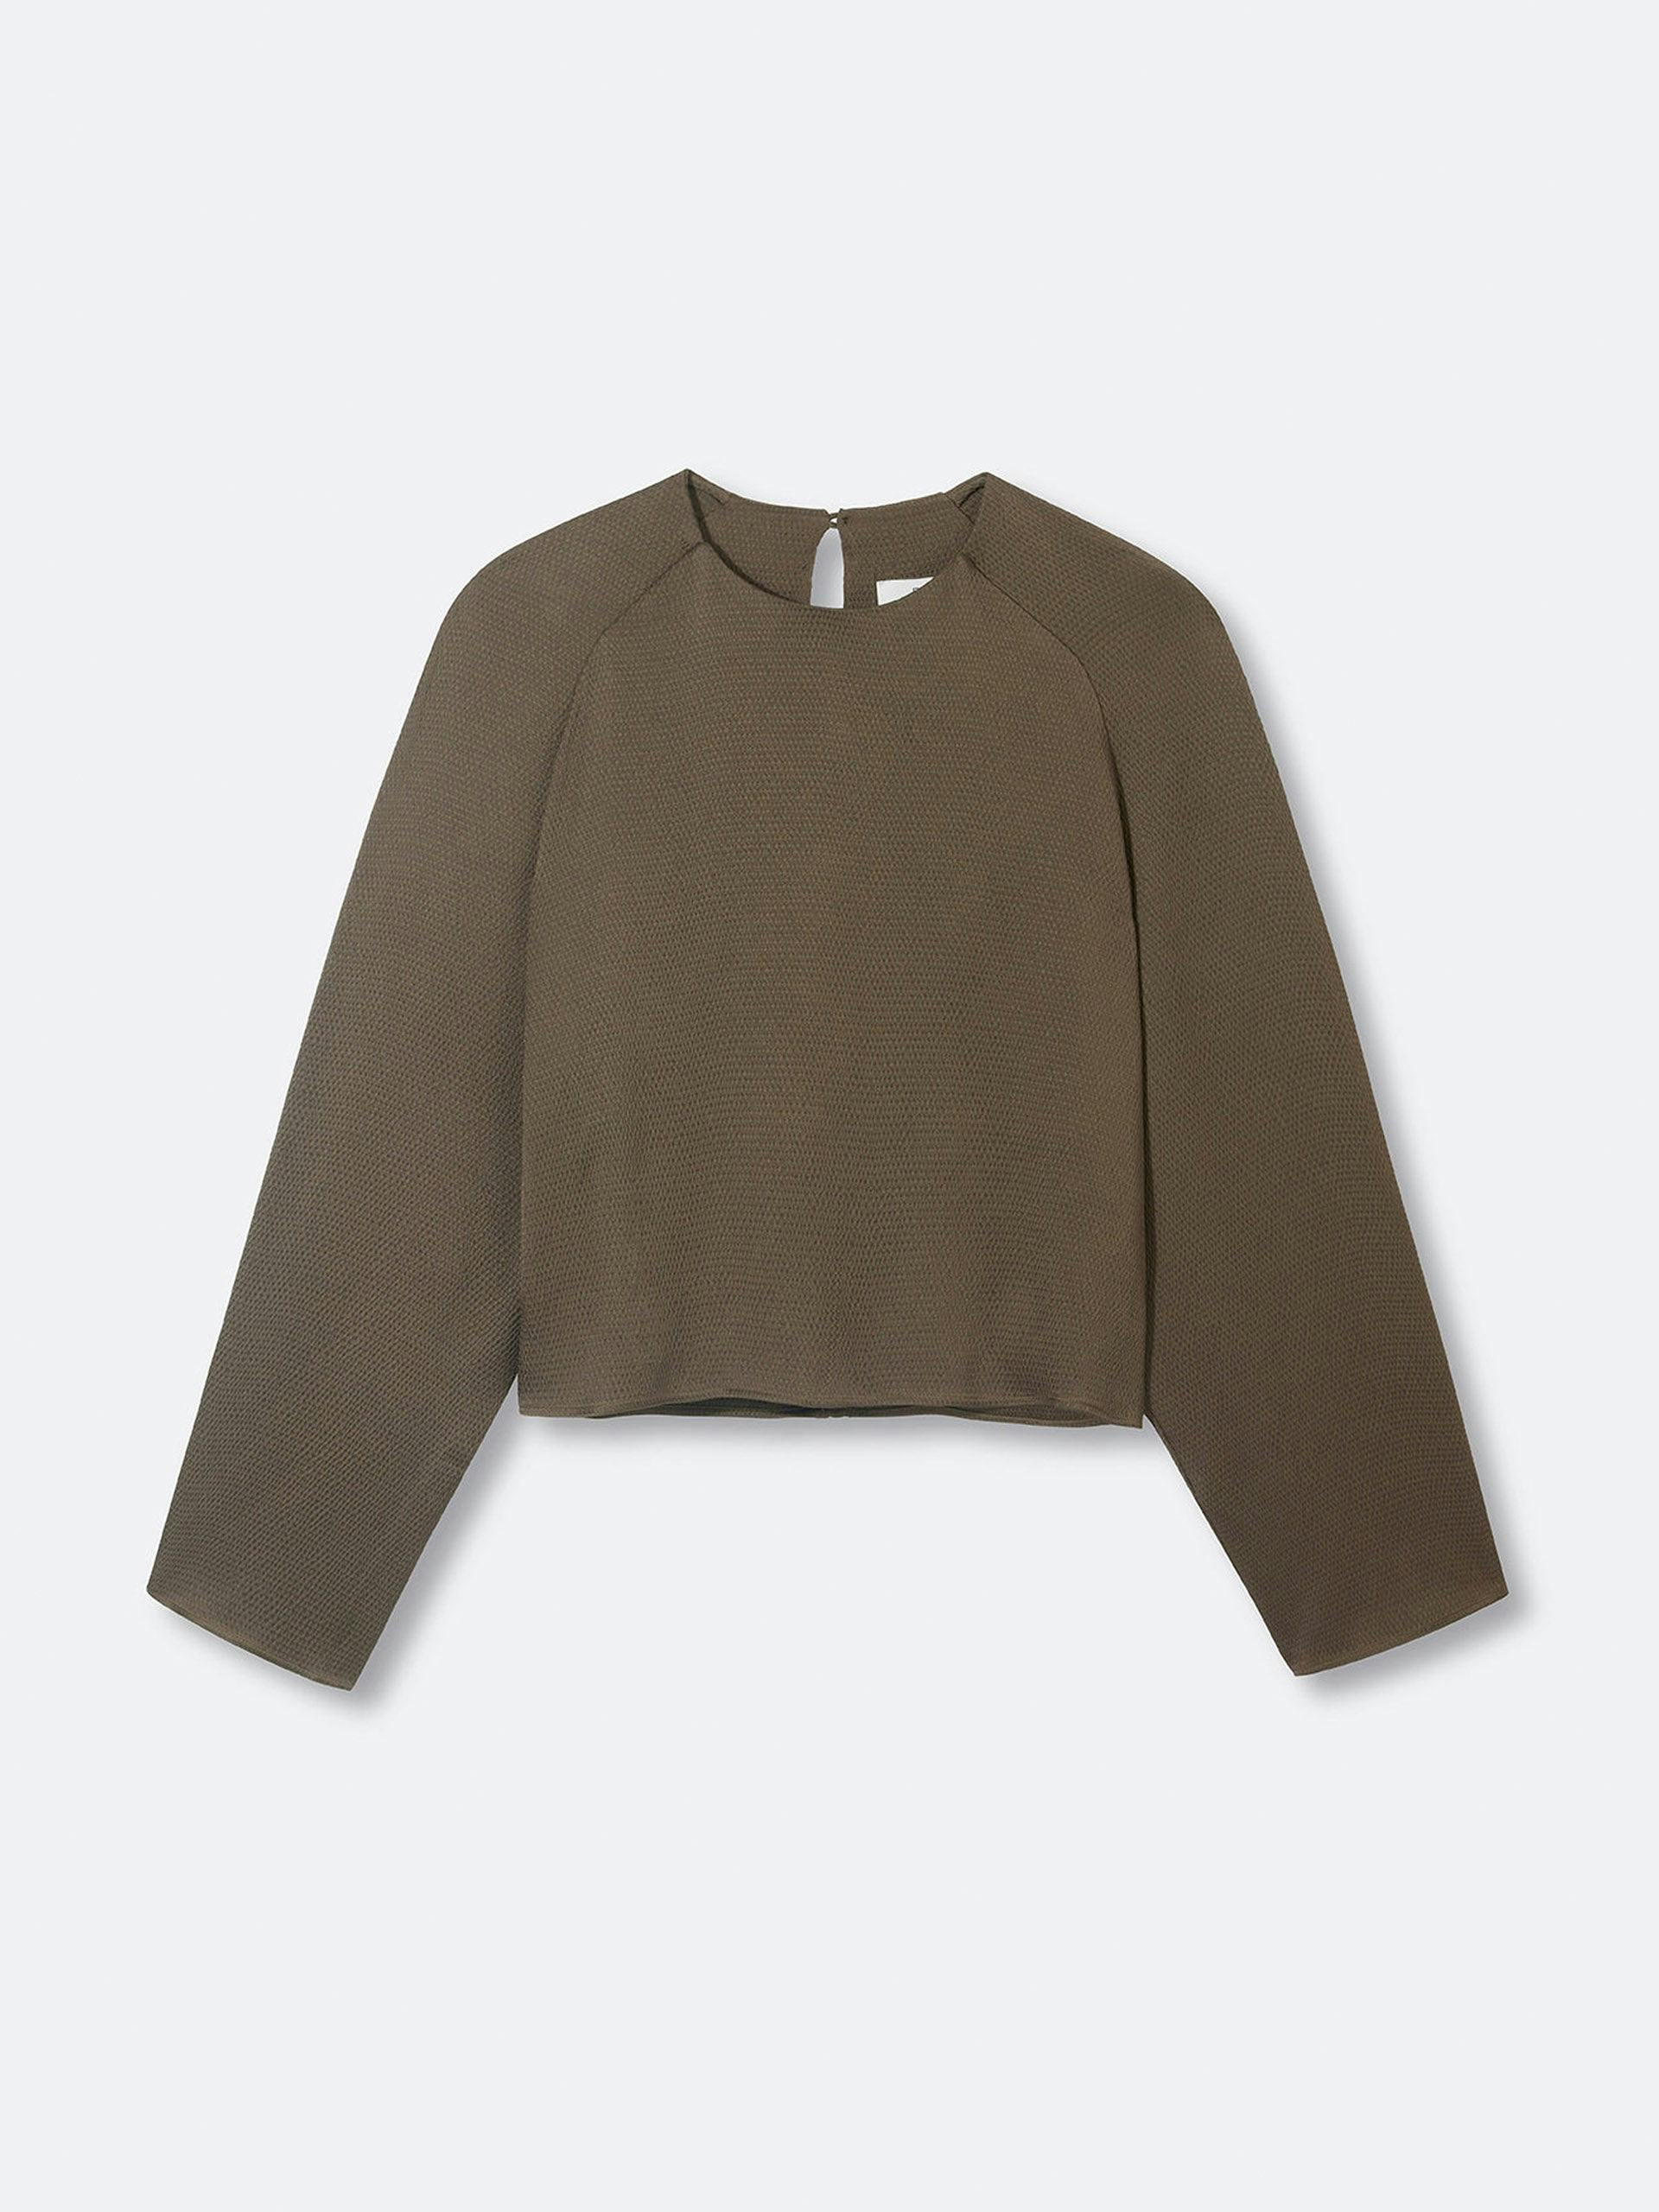 Frank olive long sleeve top